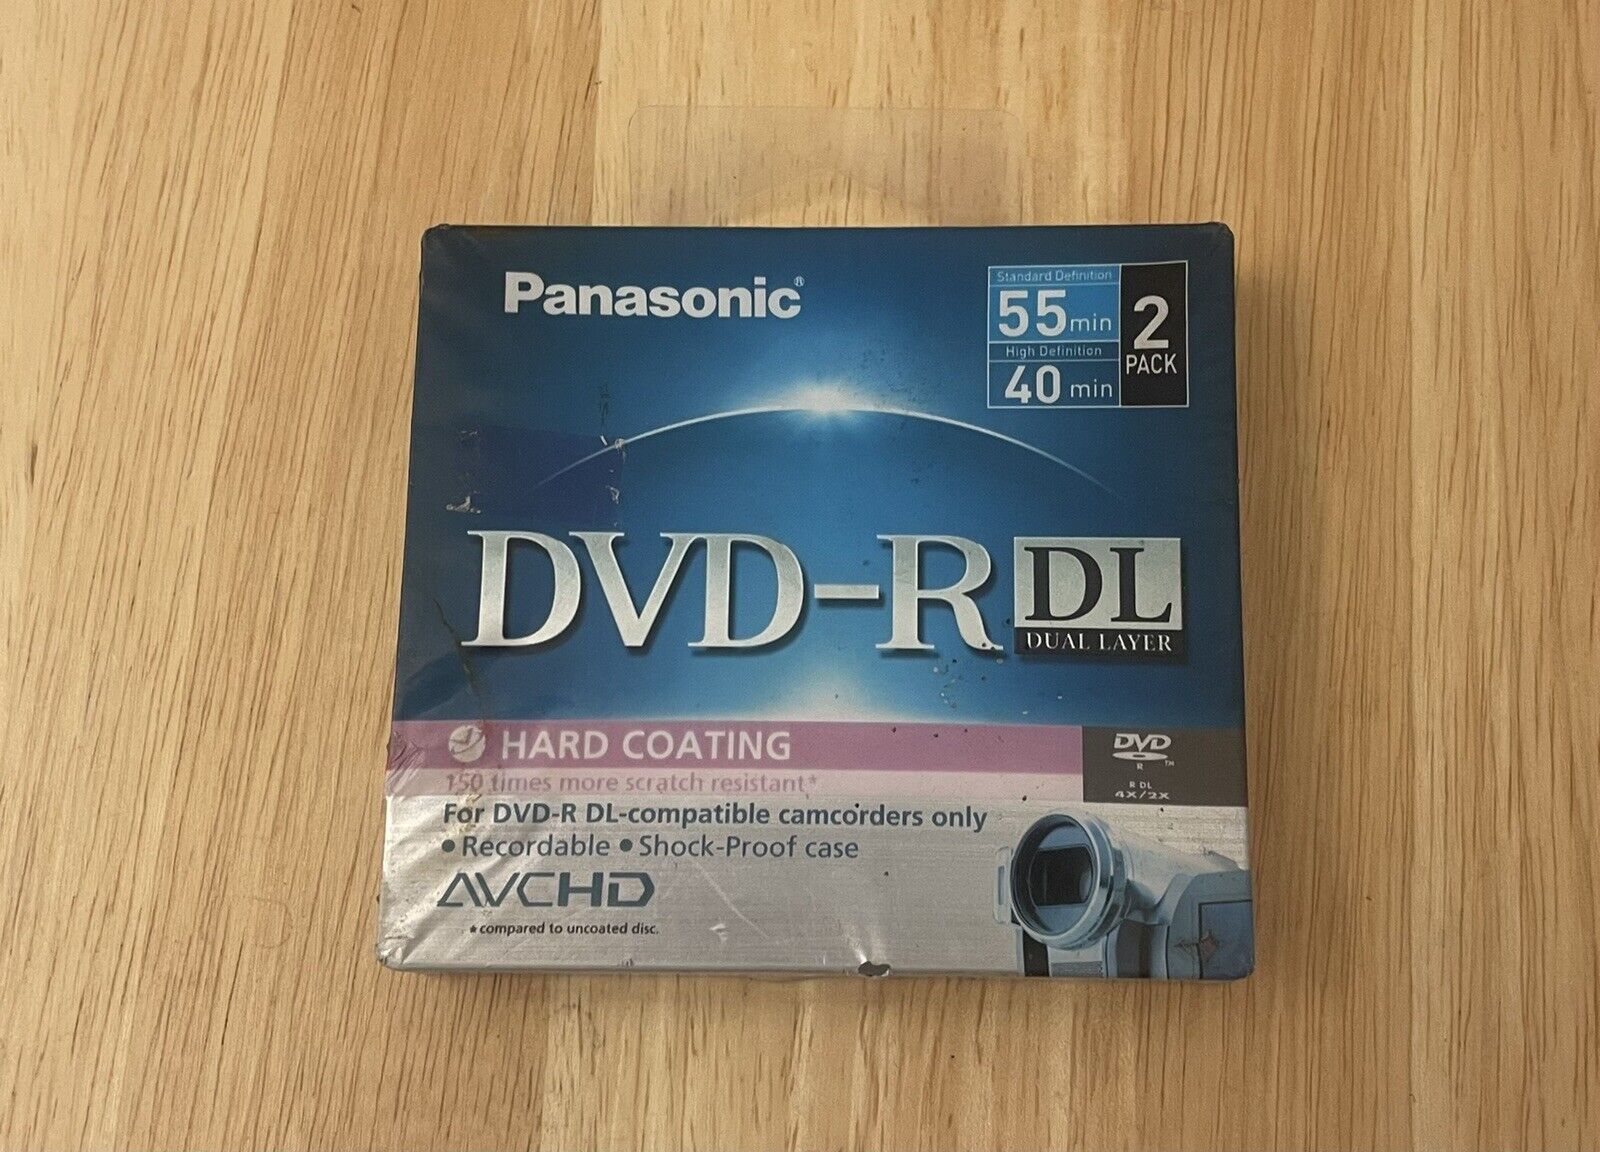 Panasonic Mini DVD-R DL Dual Layer 2 Pack With Case For Camcorders 55 Min 2.6GB